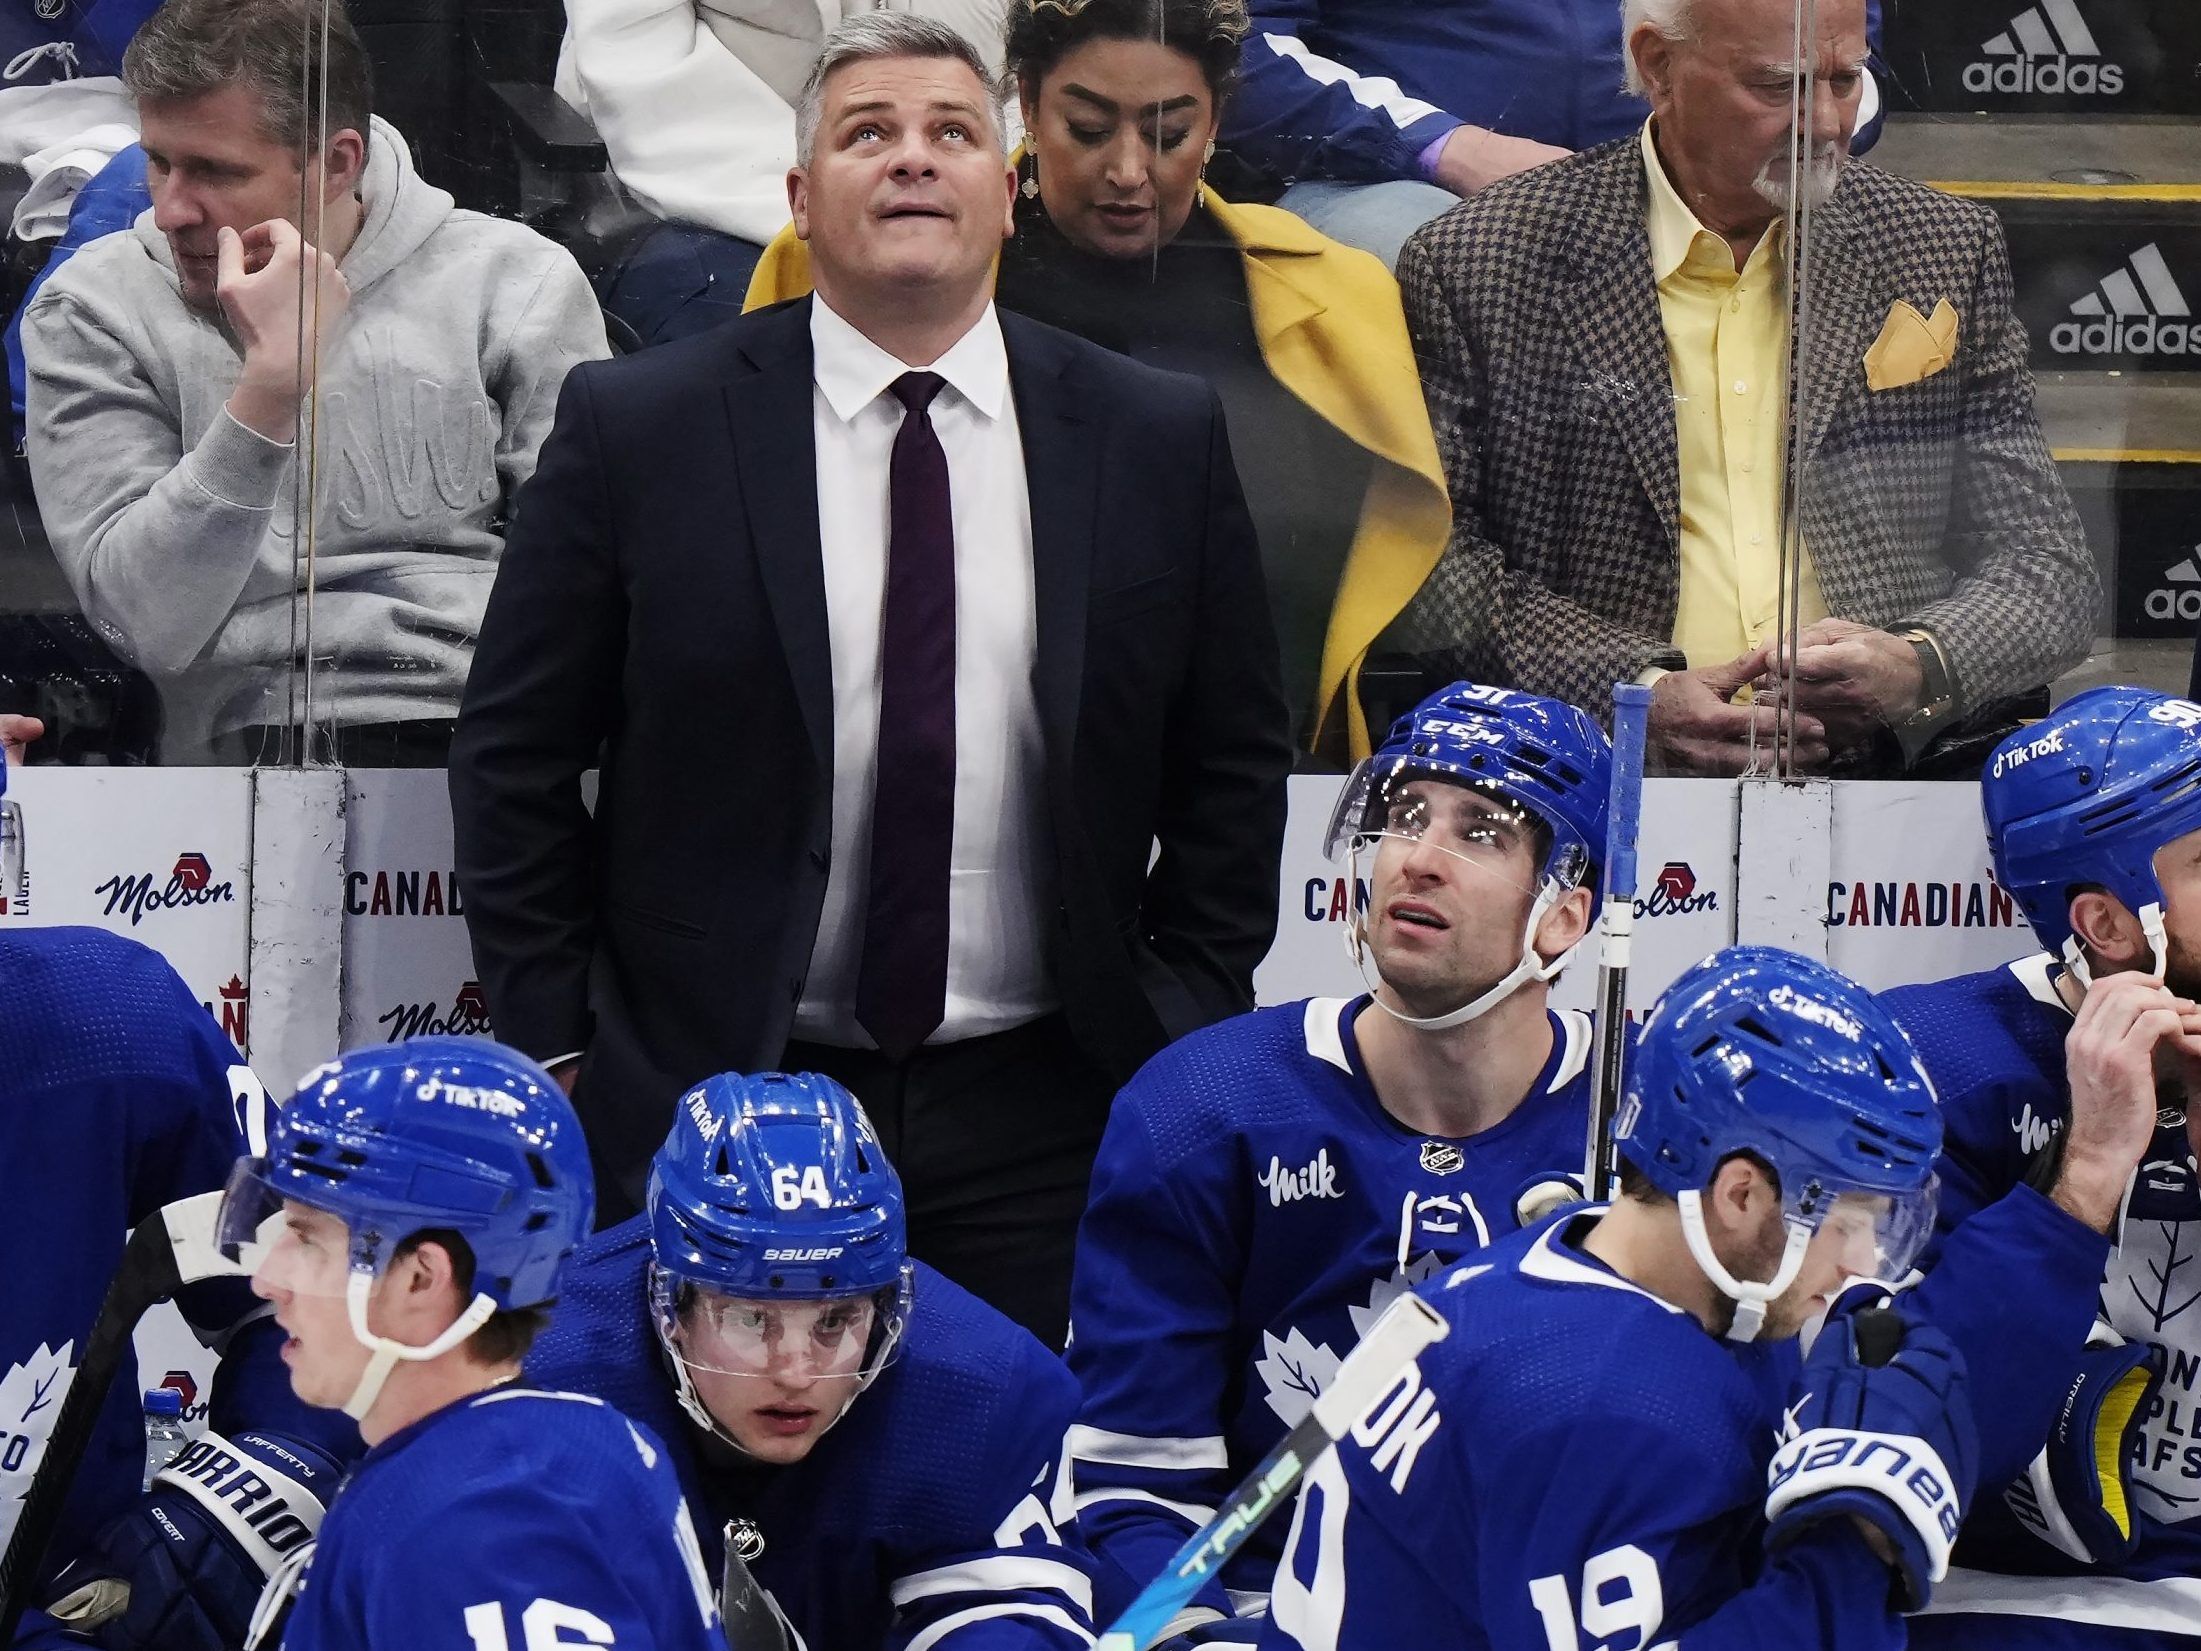 Aston-Reese scores twice, Rielly bags another as Maple Leafs down